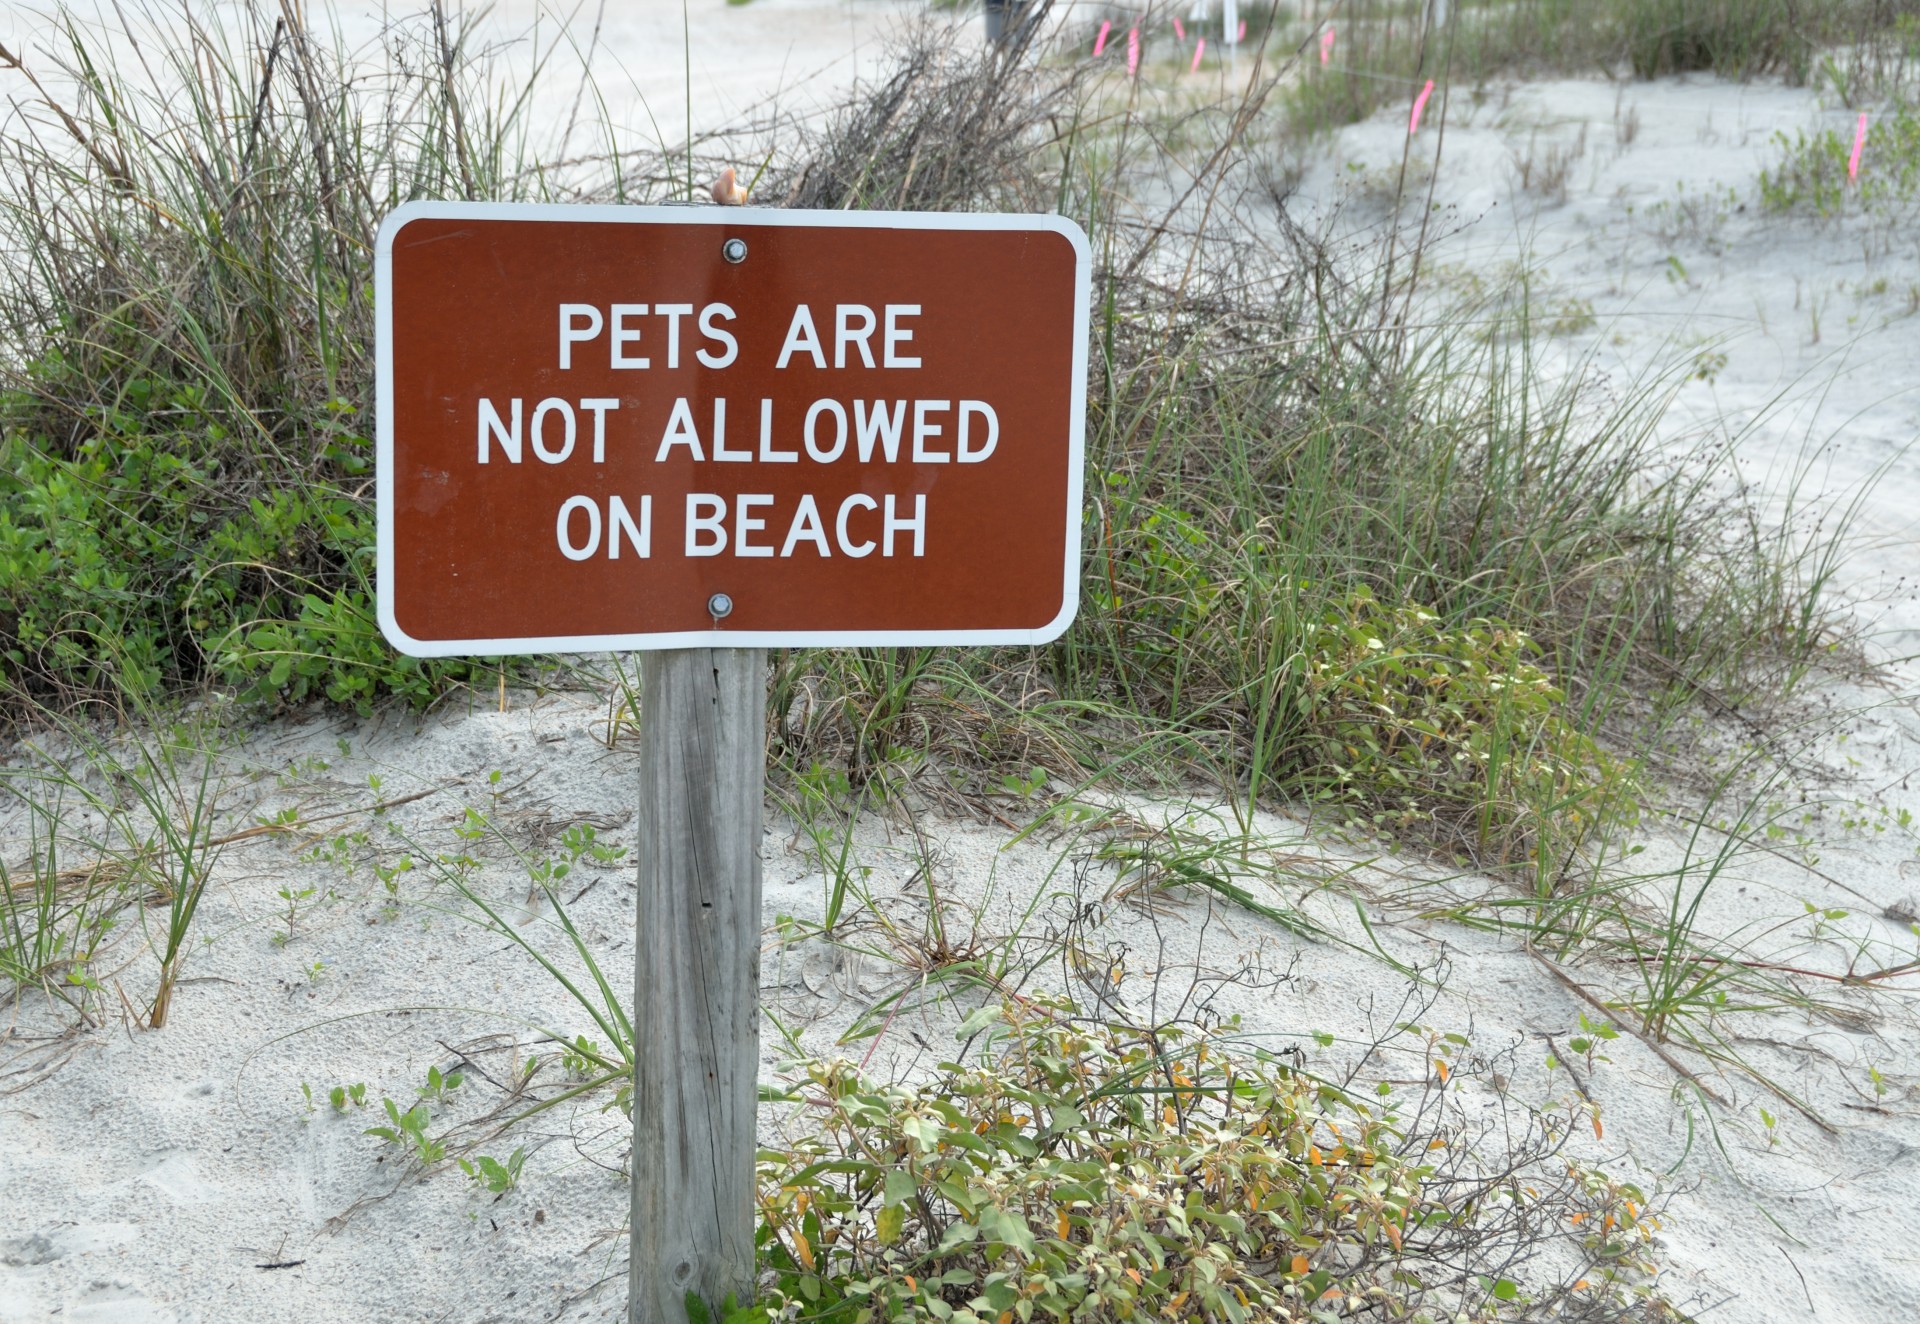 Property is not allowed. Pets are not allowed. Allowed картинки фото. Animal Beach sign. No animals allowed.